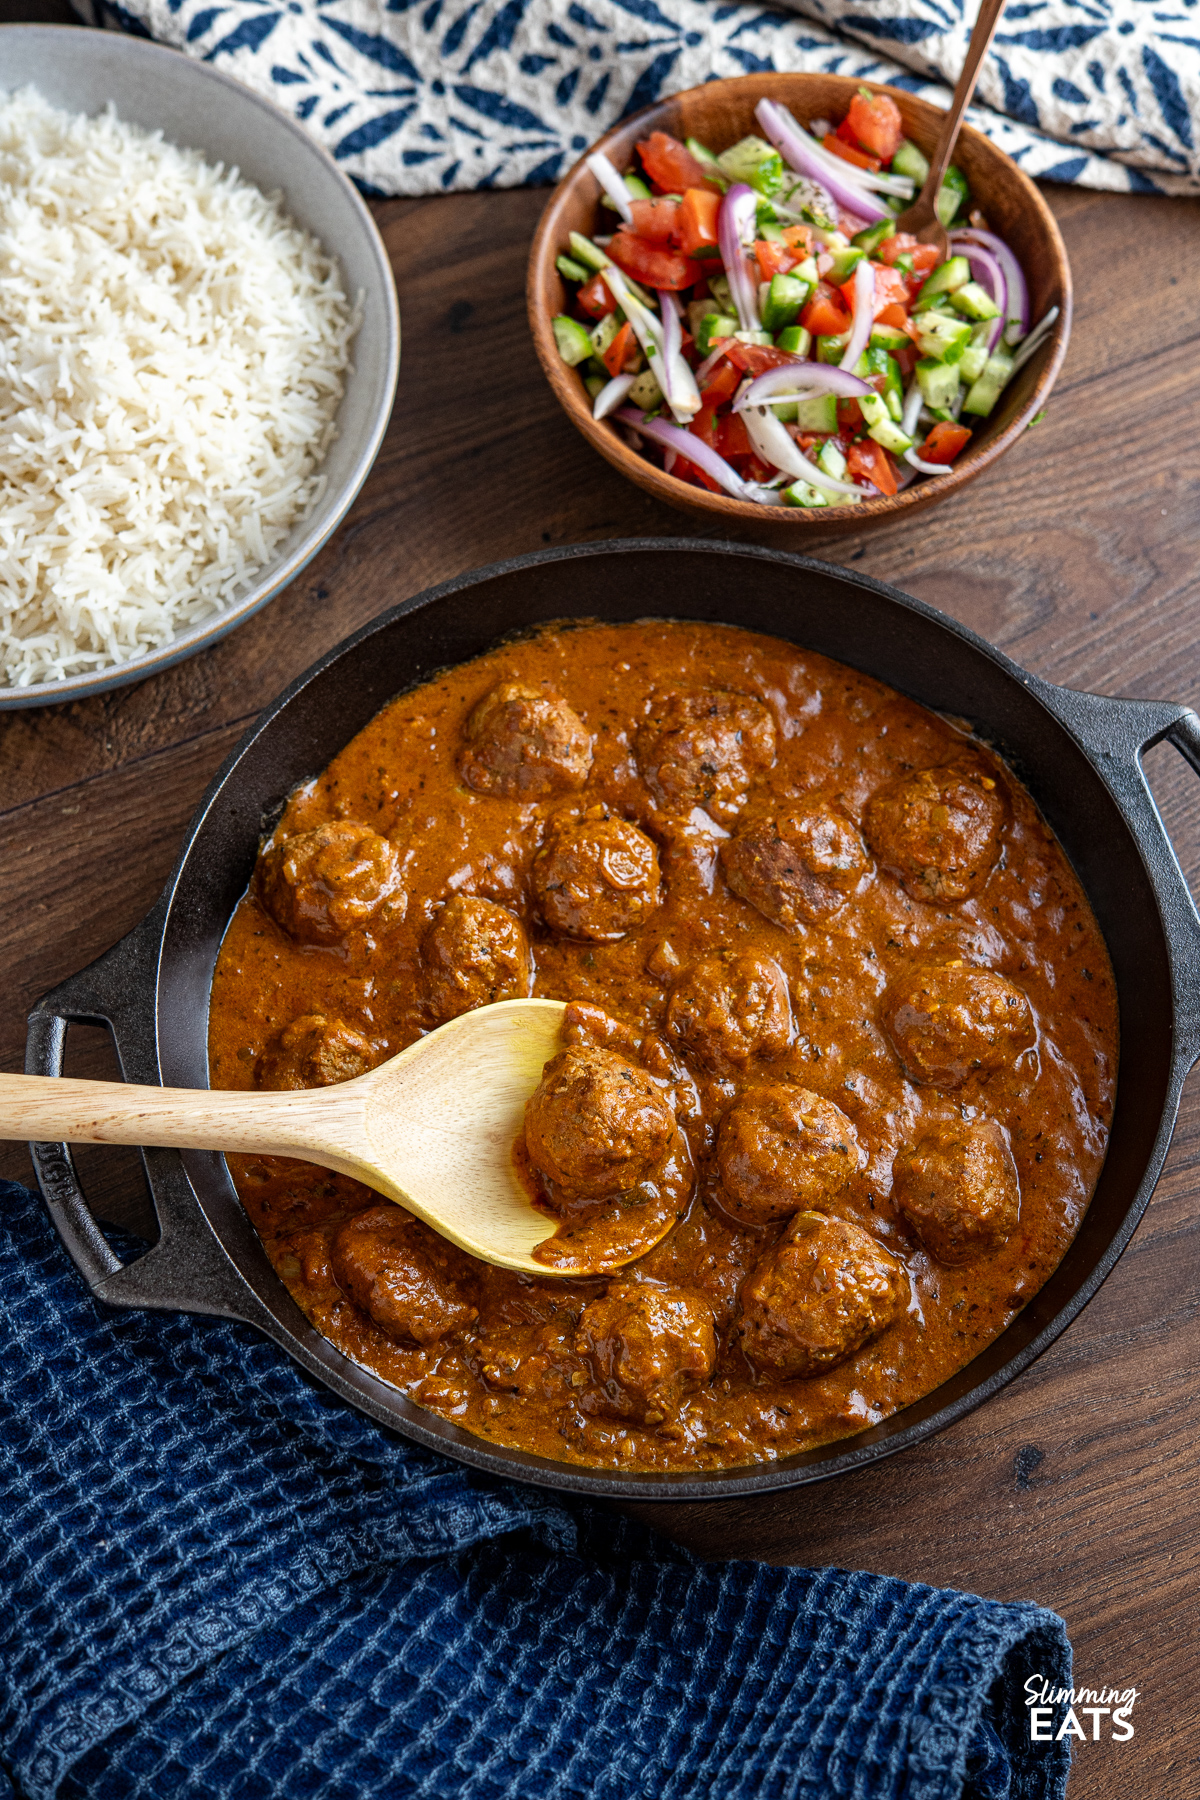 A cast iron double-handled skillet containing lamb kofta curry, placed in the foreground. In the background, there is a bowl of rice and a bowl of vibrant Indian salad, featuring fresh vegetables and herbs.